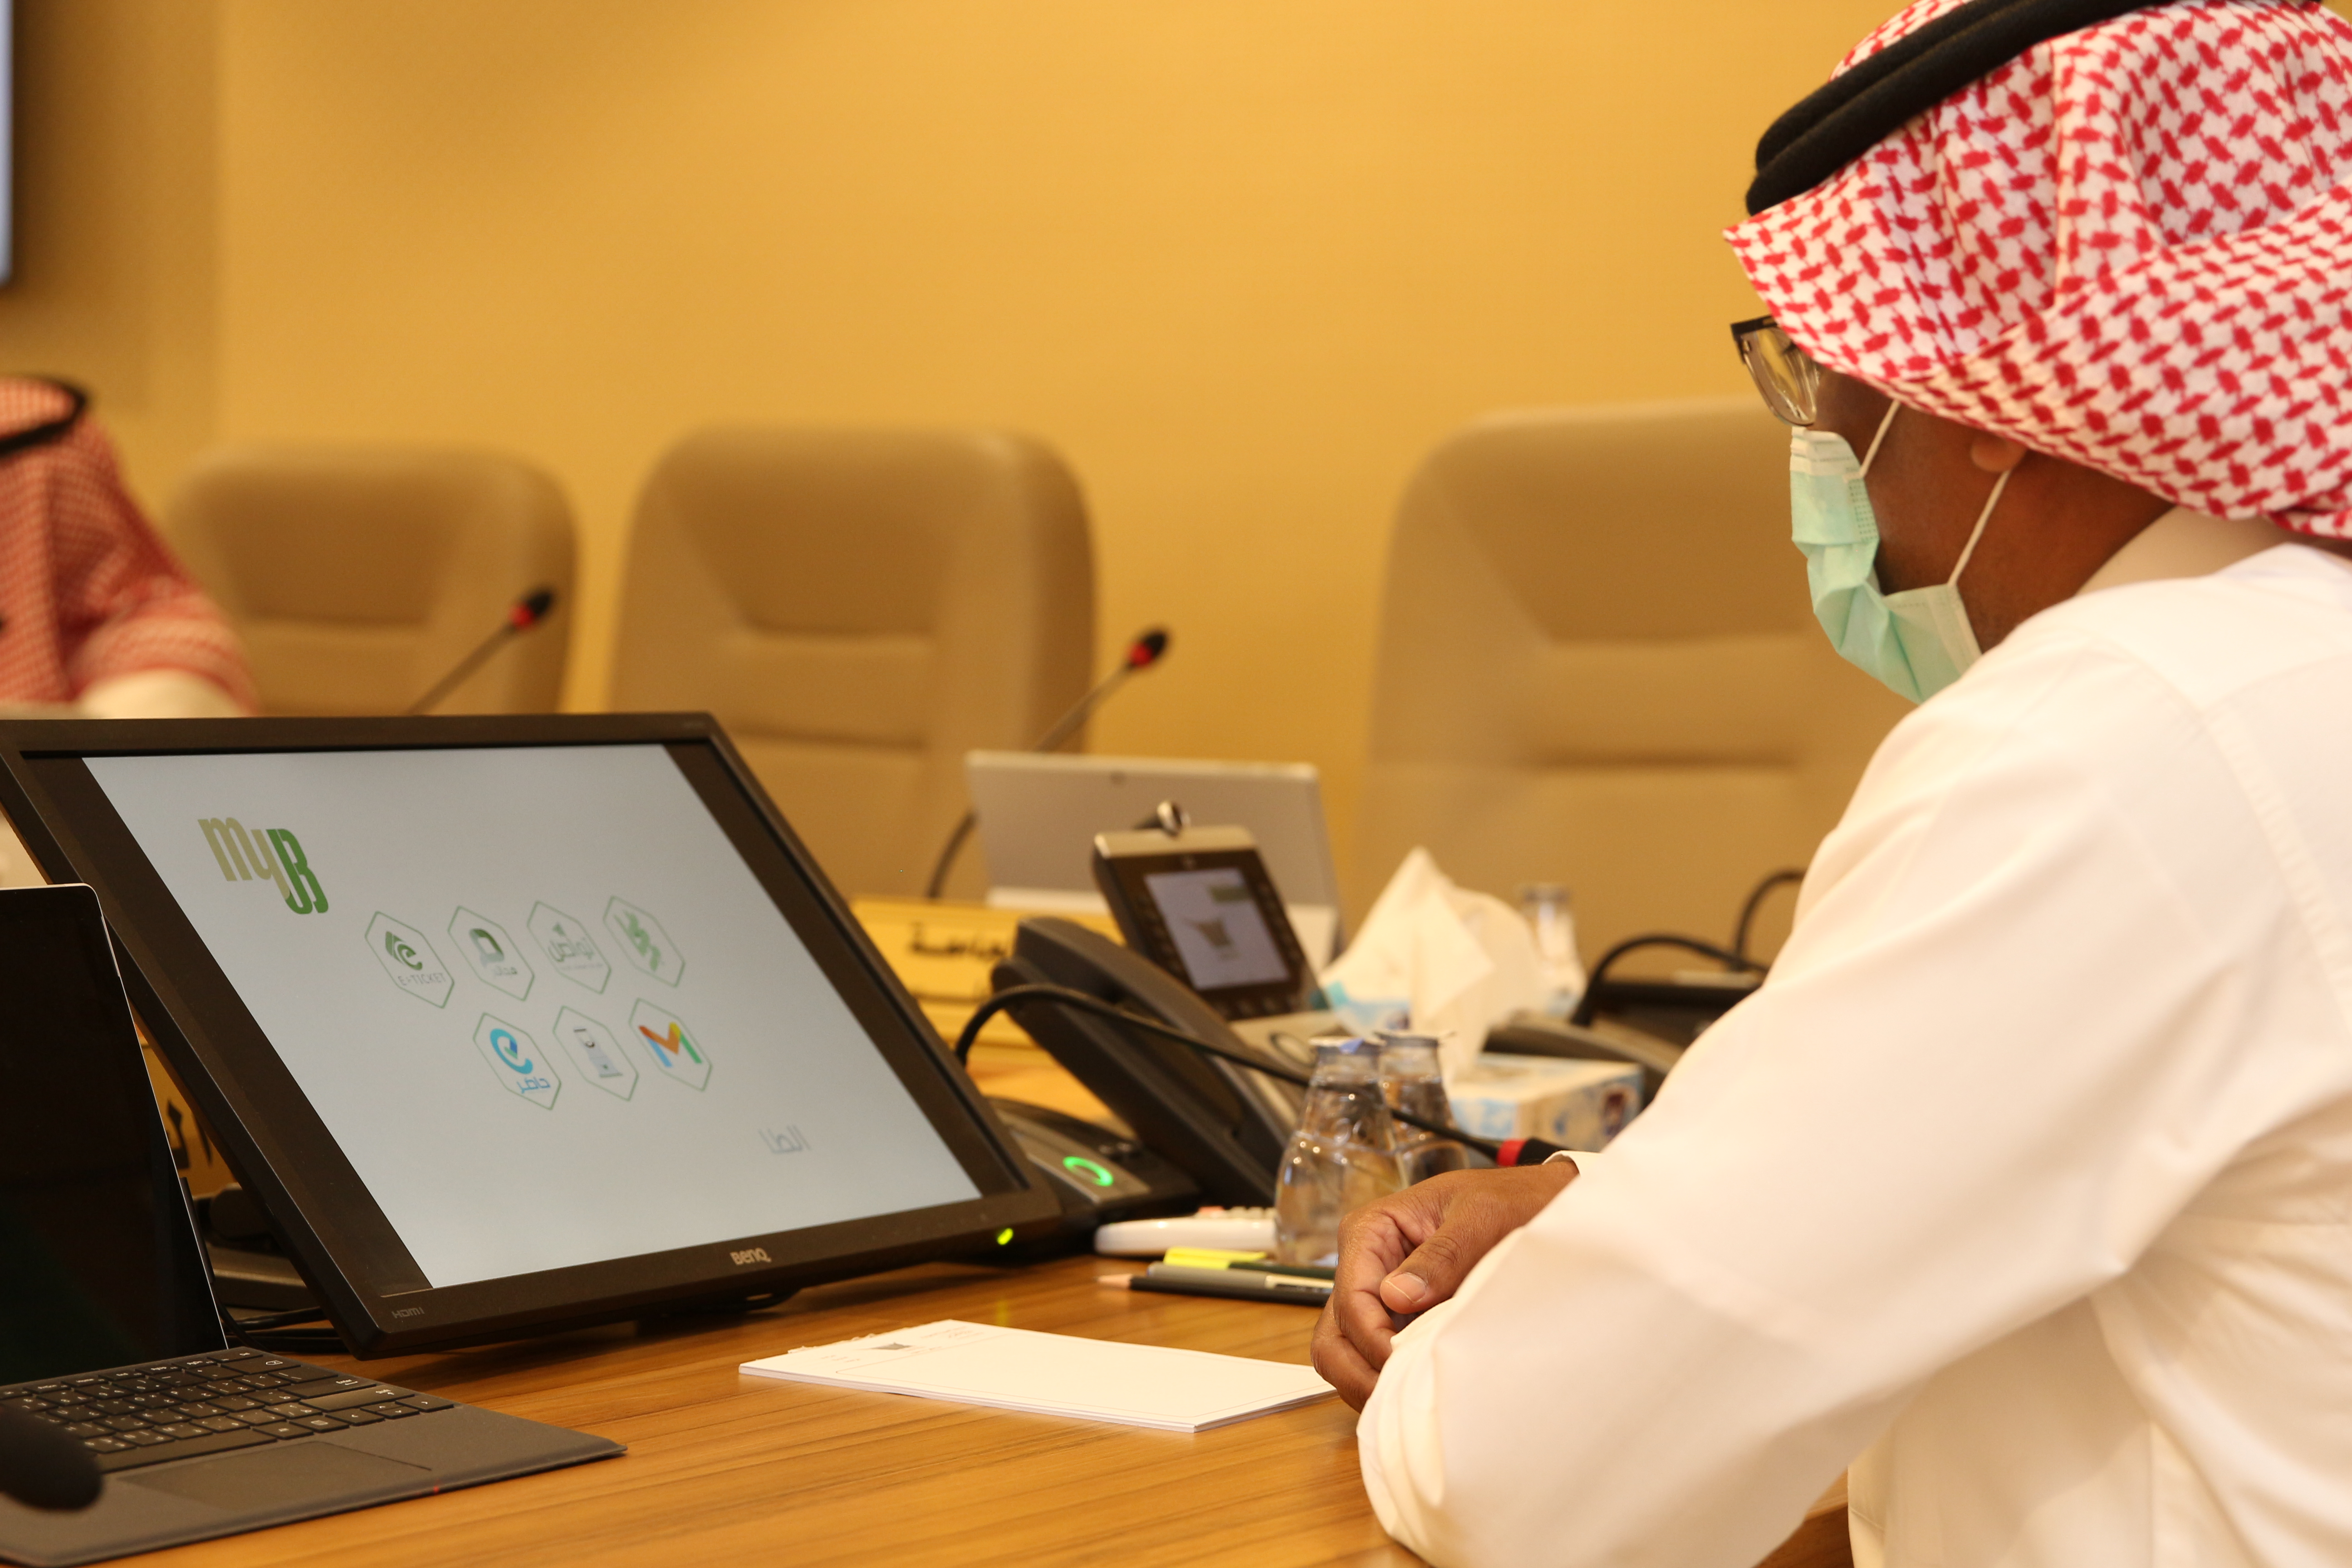 The President of Bisha University inaugurates the new electronic portal of the university